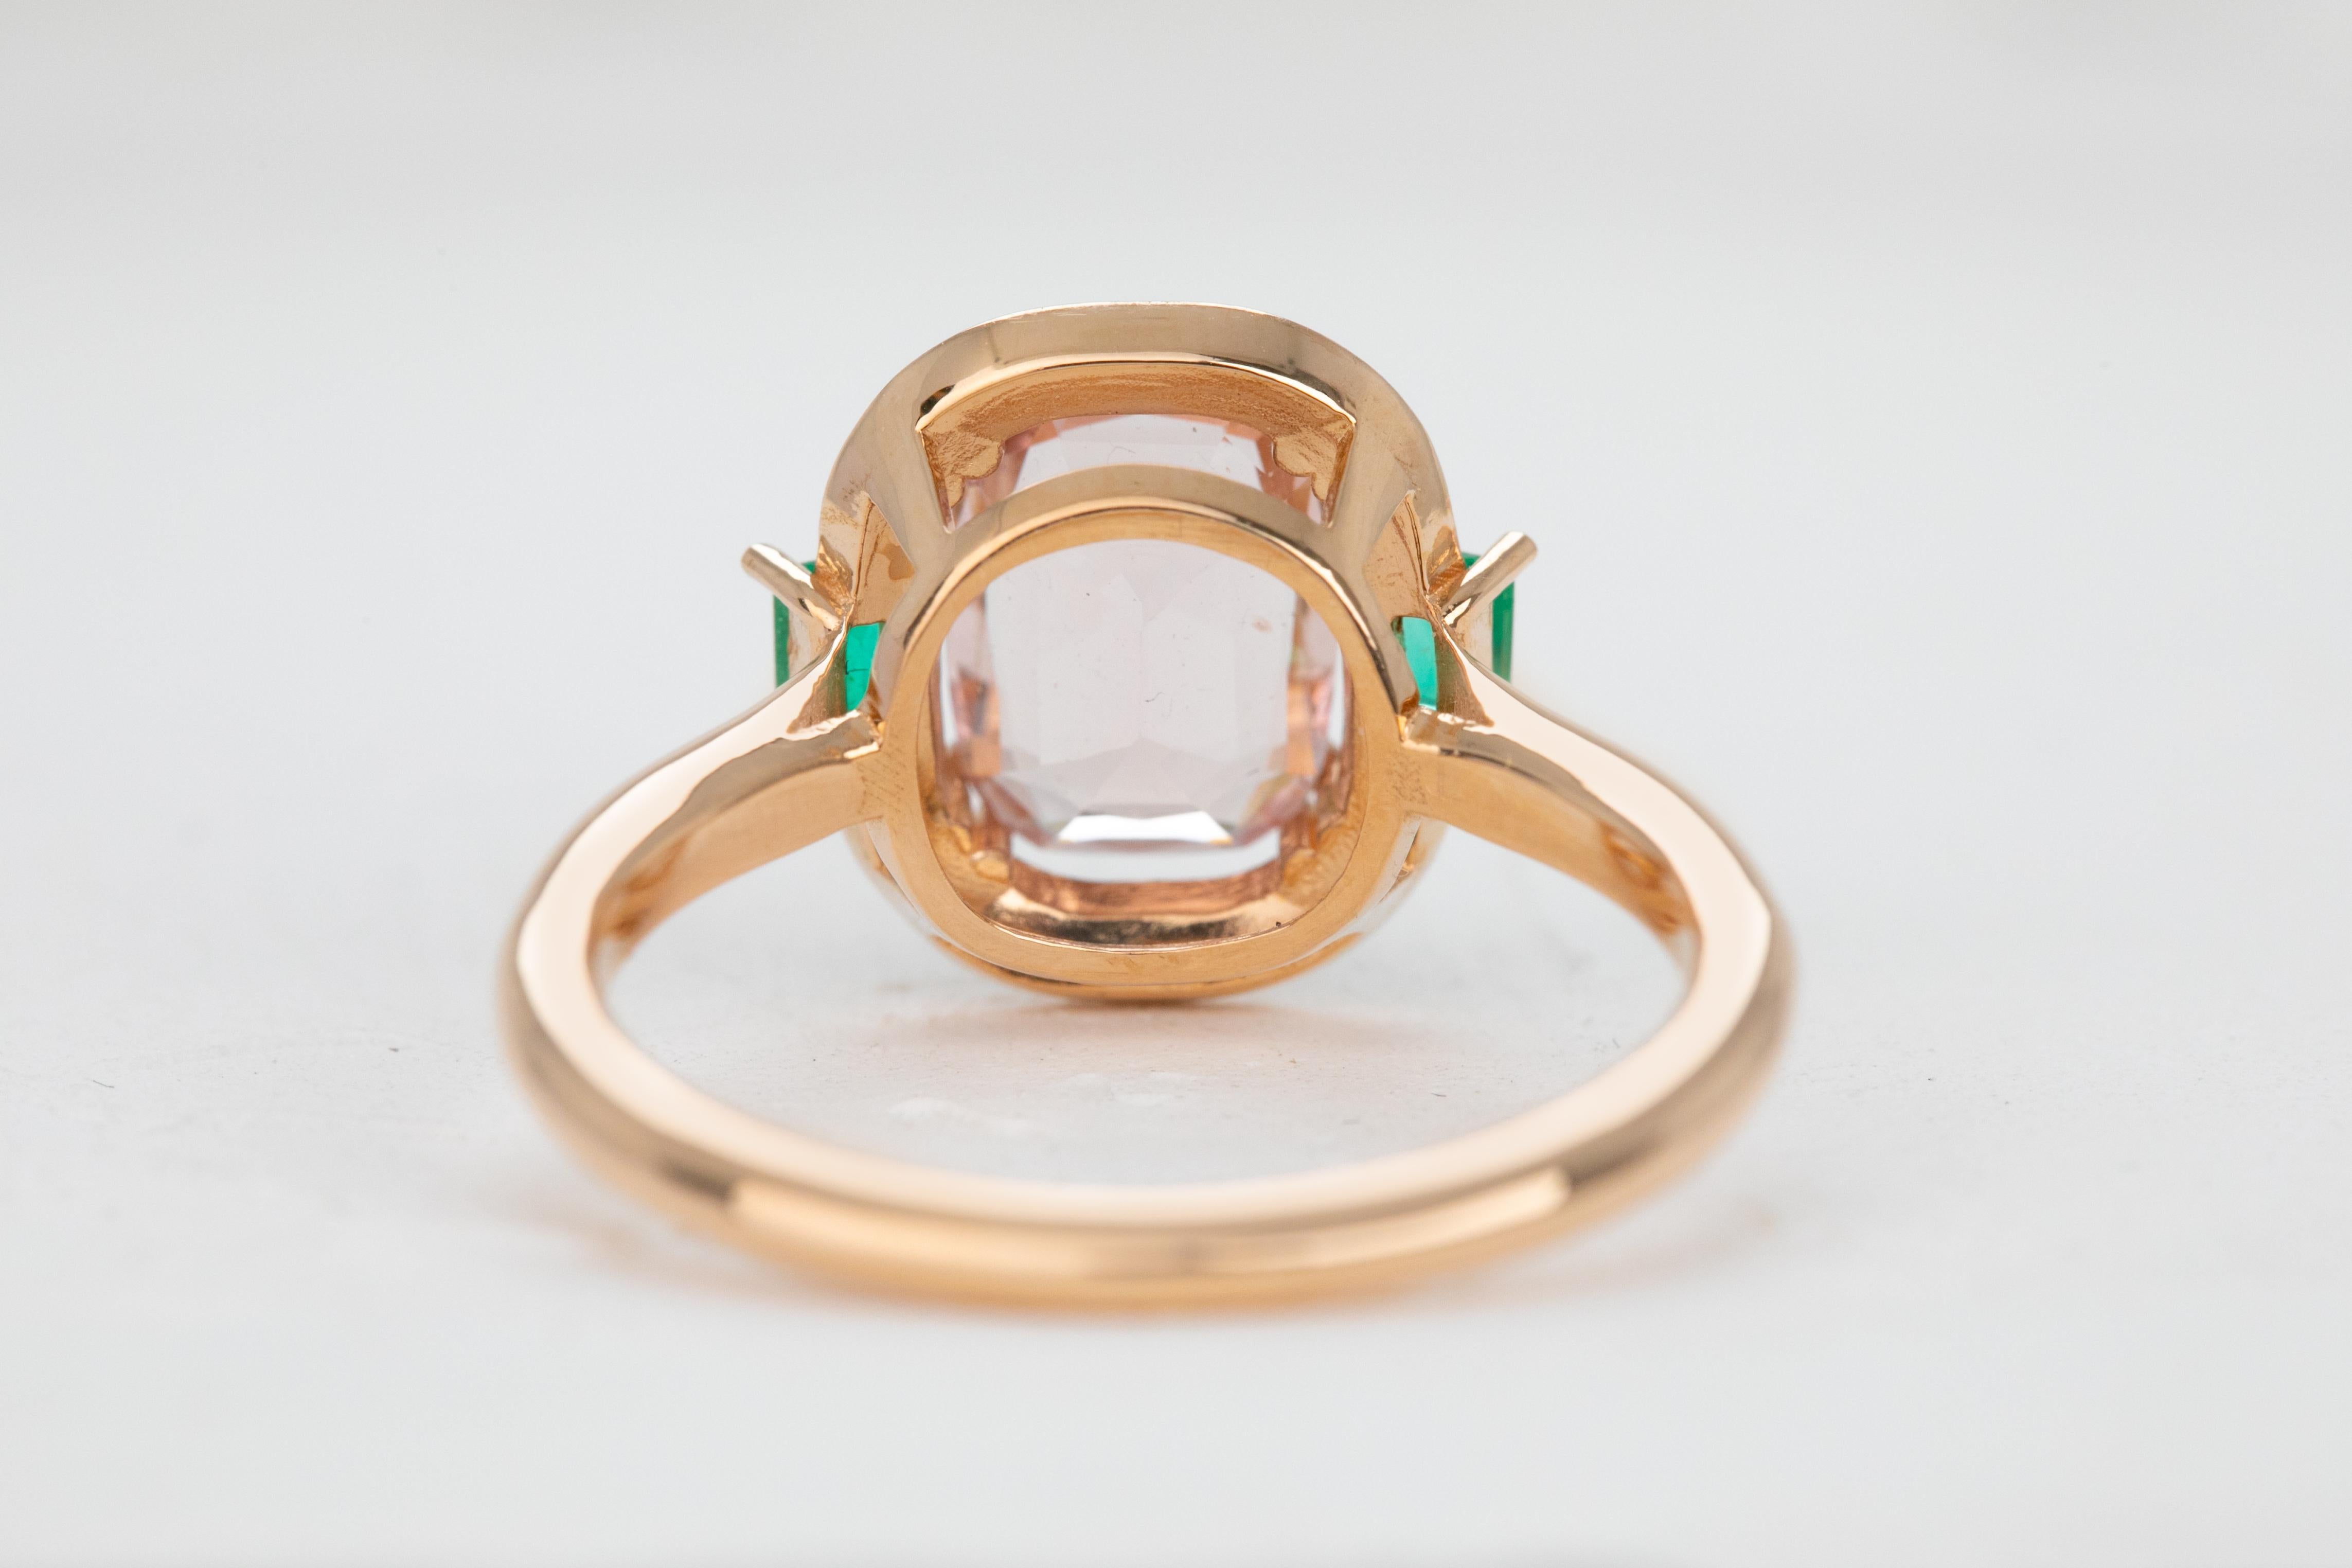 For Sale:  Artdeco Style, Enameled 14k Gold Morganite and Emerald Cocktail Ring 6